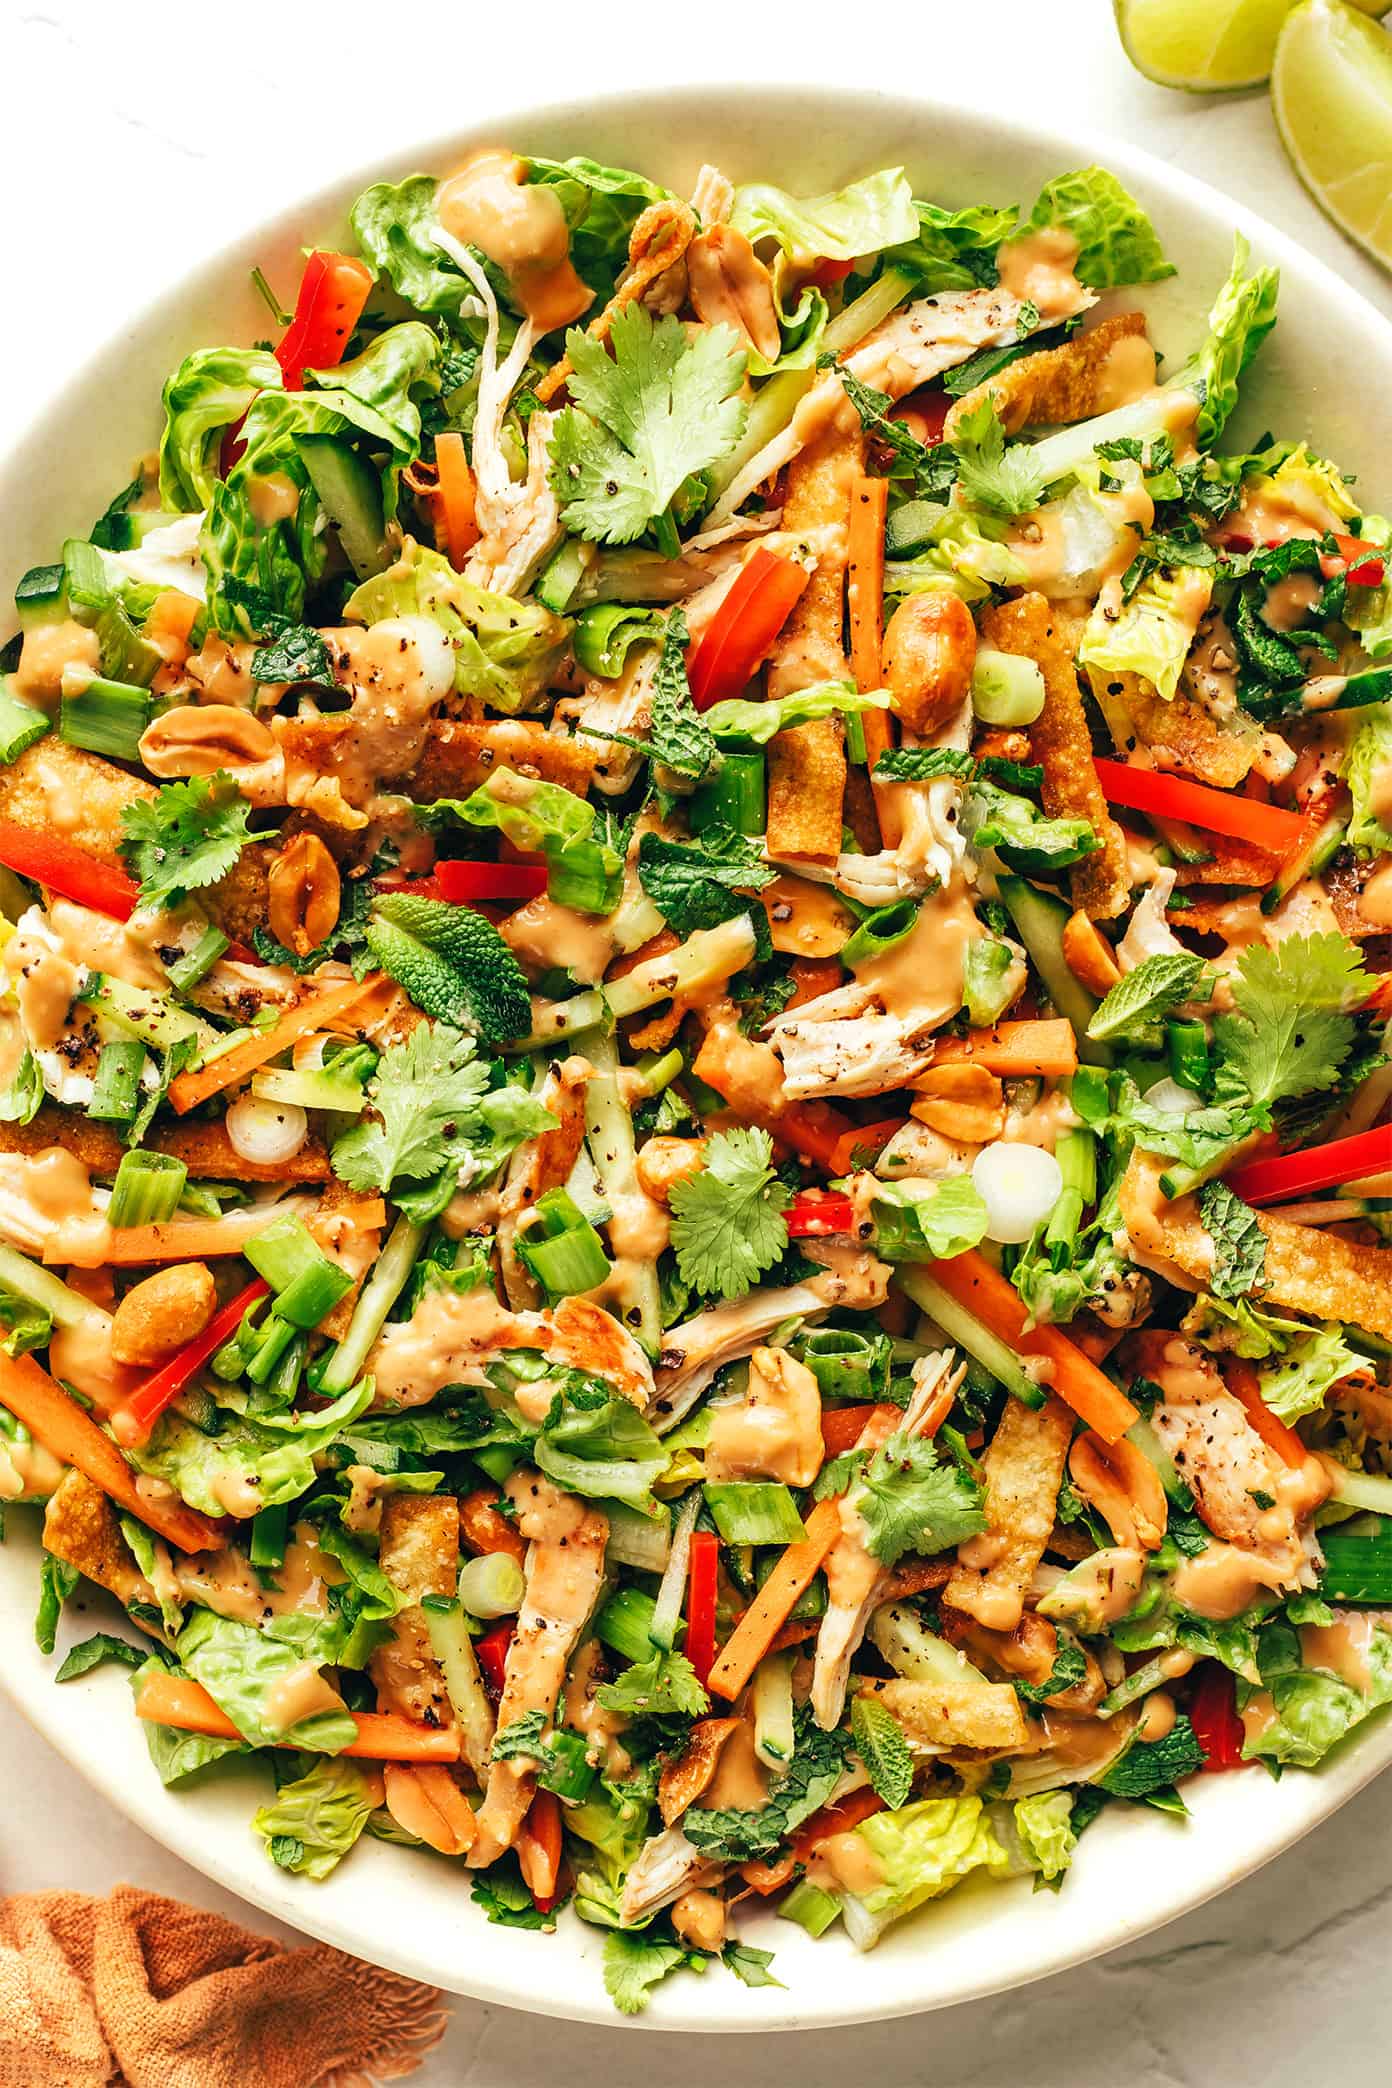 Thai Crunch Salad in bowl drizzled with peanut dressing